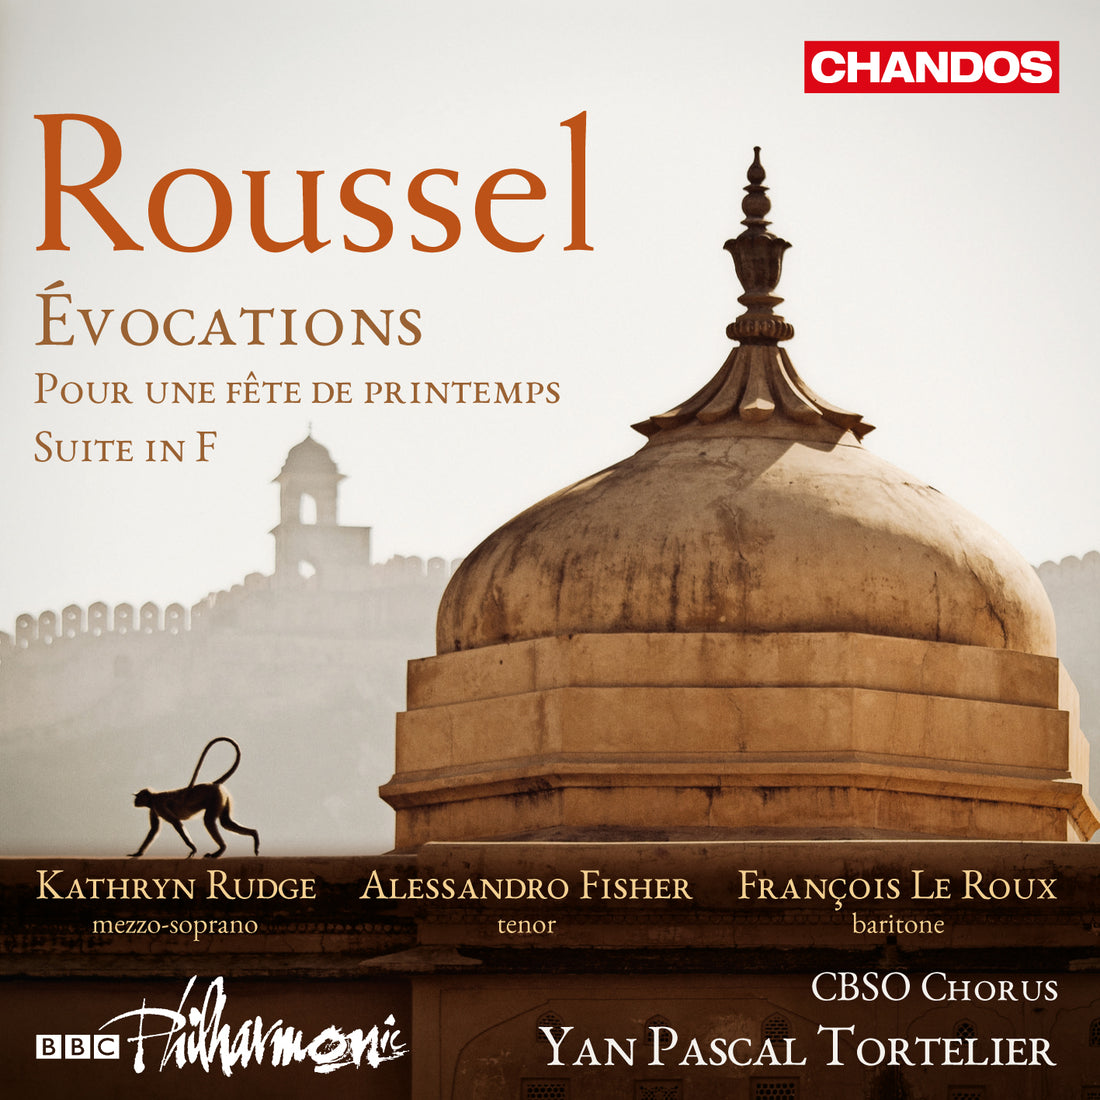 ROUSSEL’S EVOCATIONS - CHANDOS RECORD RELEASE